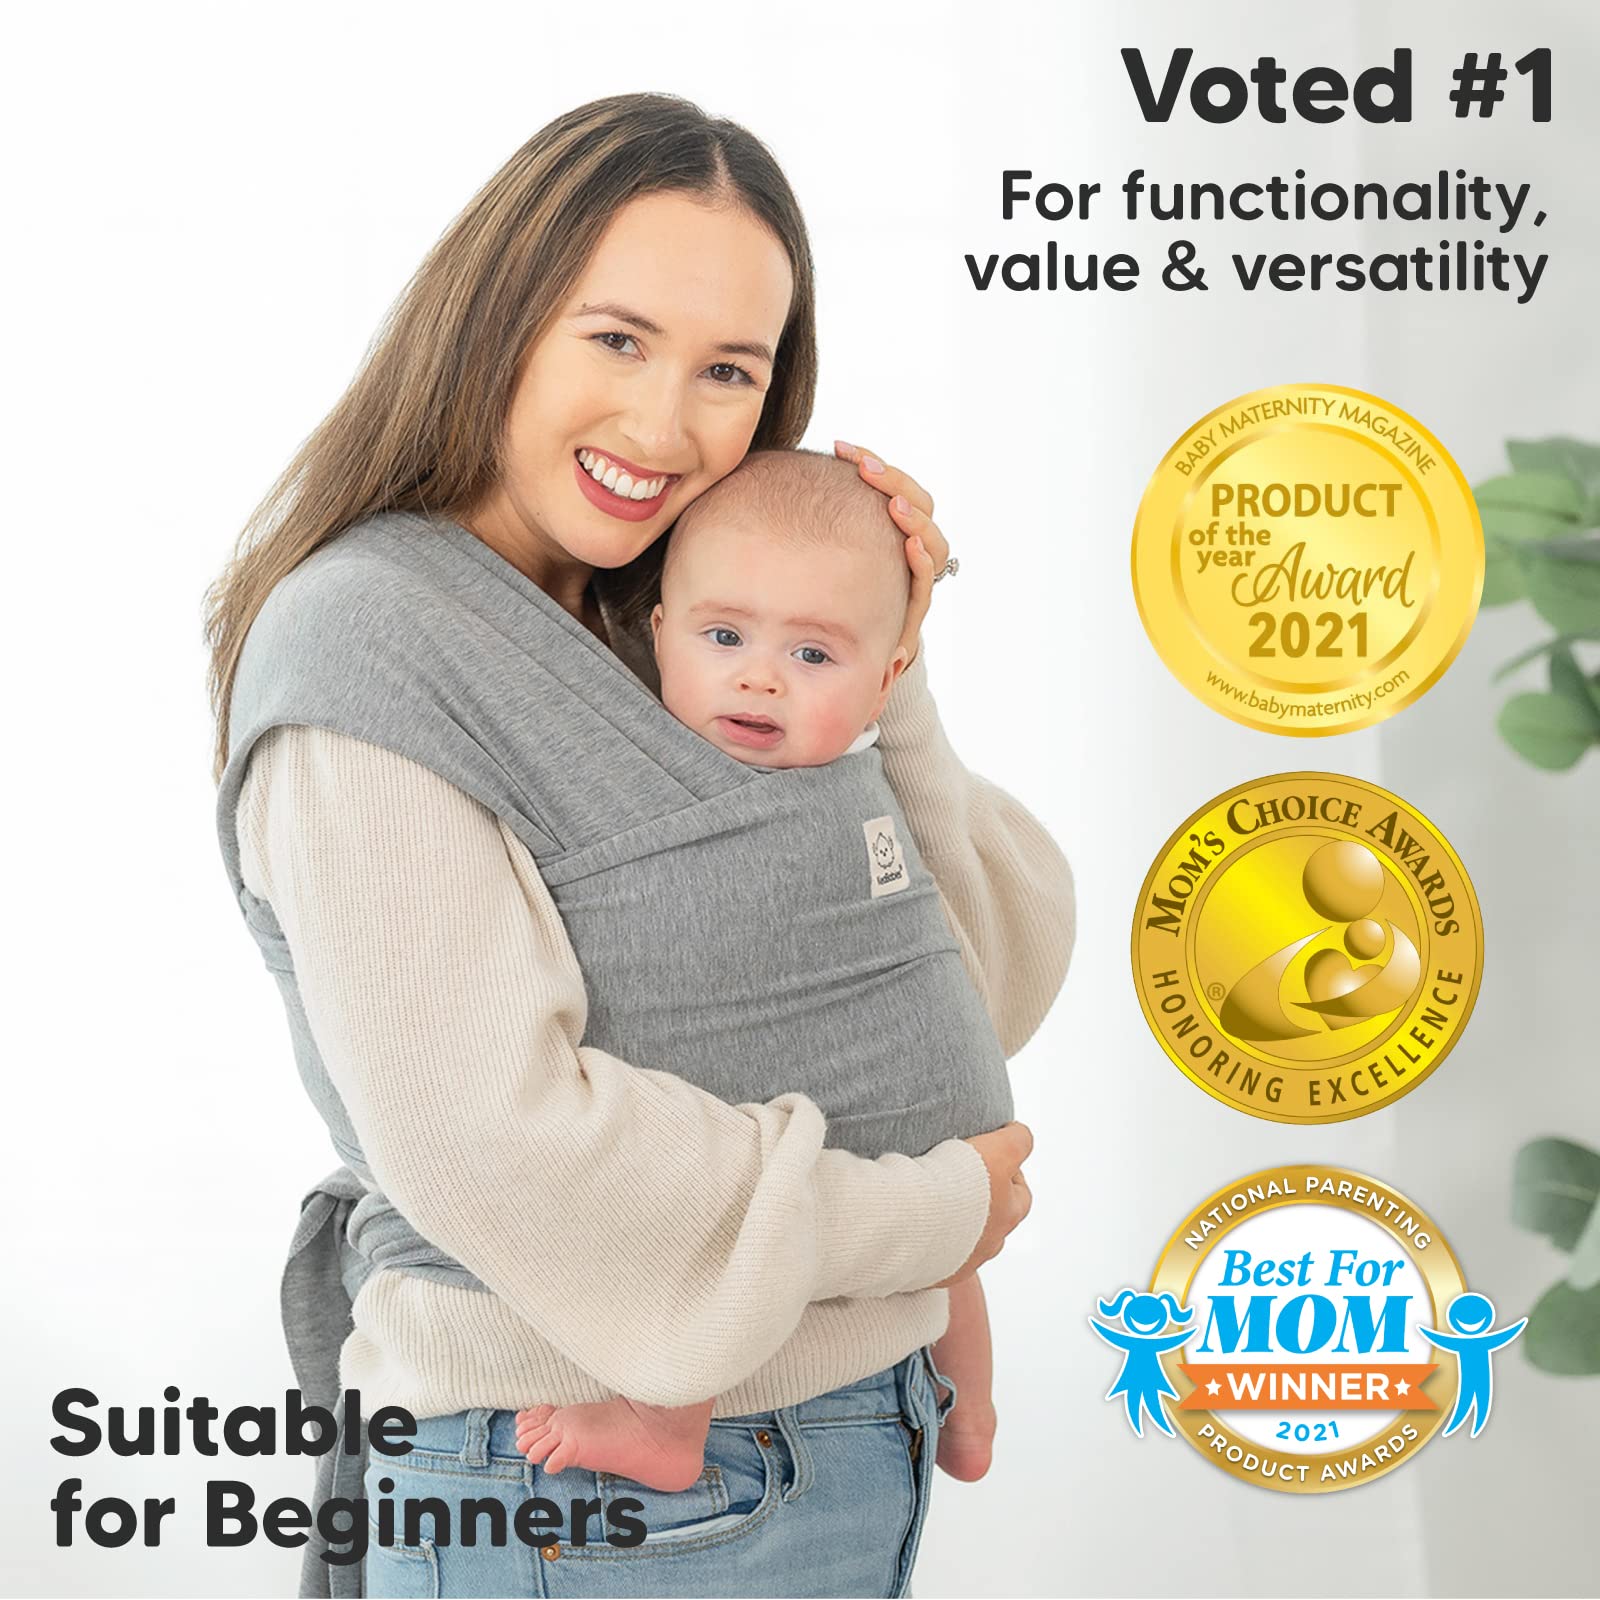 KeaBabies Baby Wrap Carrier - All in 1 Original Breathable Baby Sling, Lightweight,Hands Free Baby Carrier Sling, Baby Carrier Wrap, Baby Carriers for Newborn,Infant, Baby Wraps Carrier (Classic Gray)